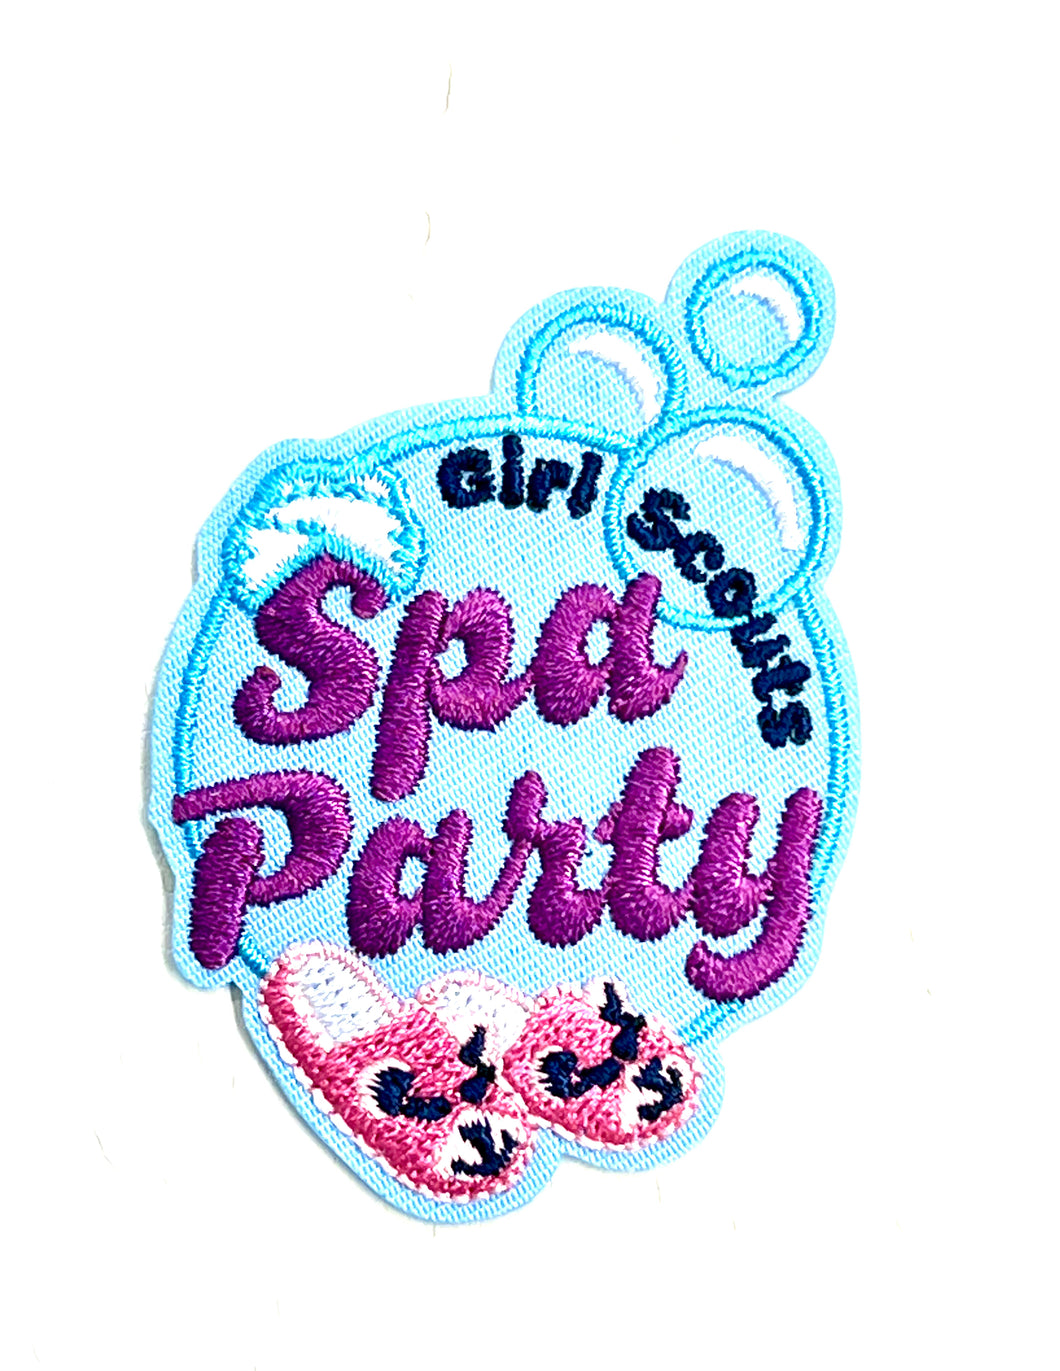 Girl Scouts Spa Party fun patch